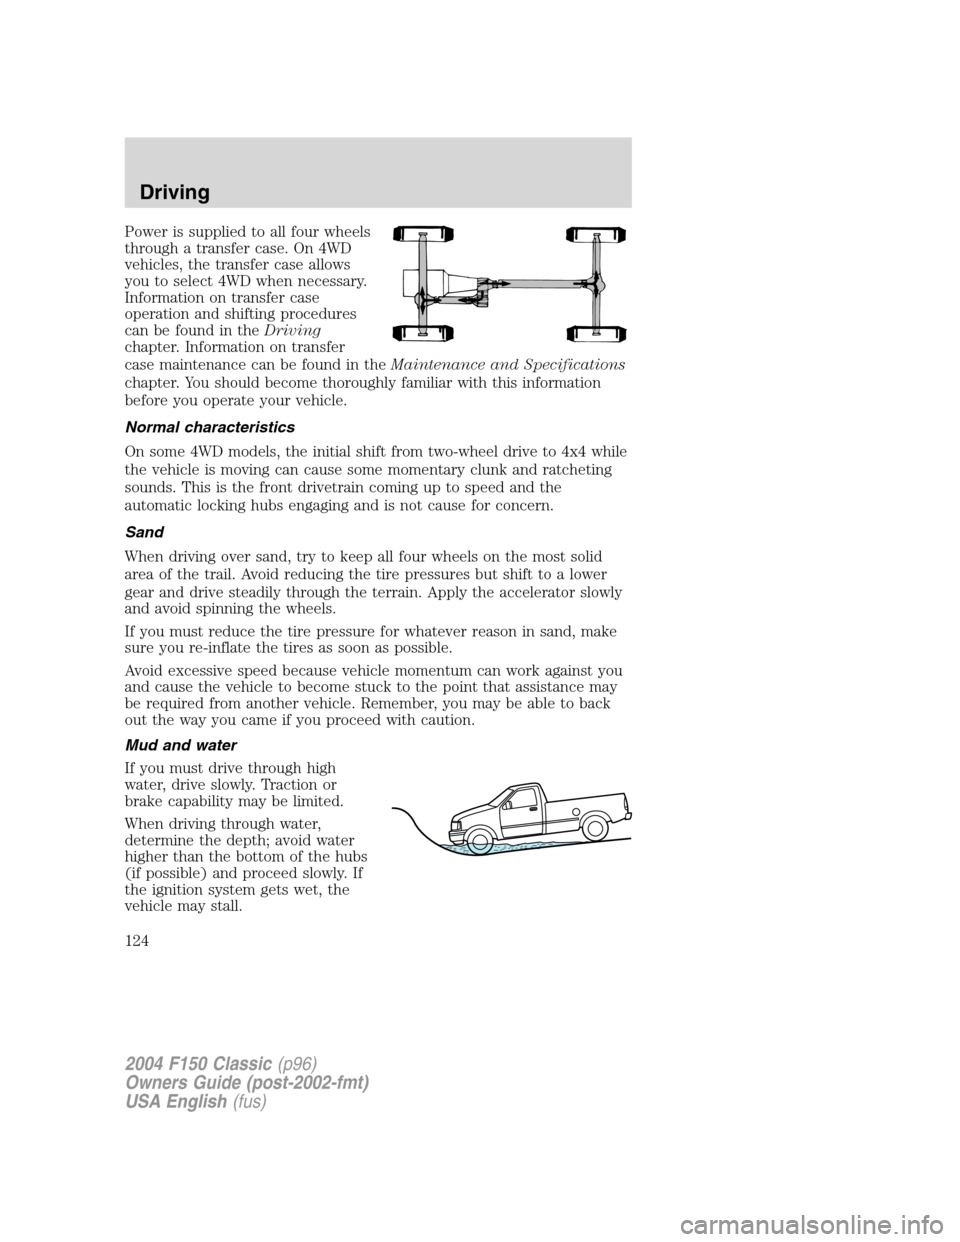 FORD F150 2004 11.G Herritage Owners Manual Power is supplied to all four wheels
through a transfer case. On 4WD
vehicles, the transfer case allows
you to select 4WD when necessary.
Information on transfer case
operation and shifting procedures